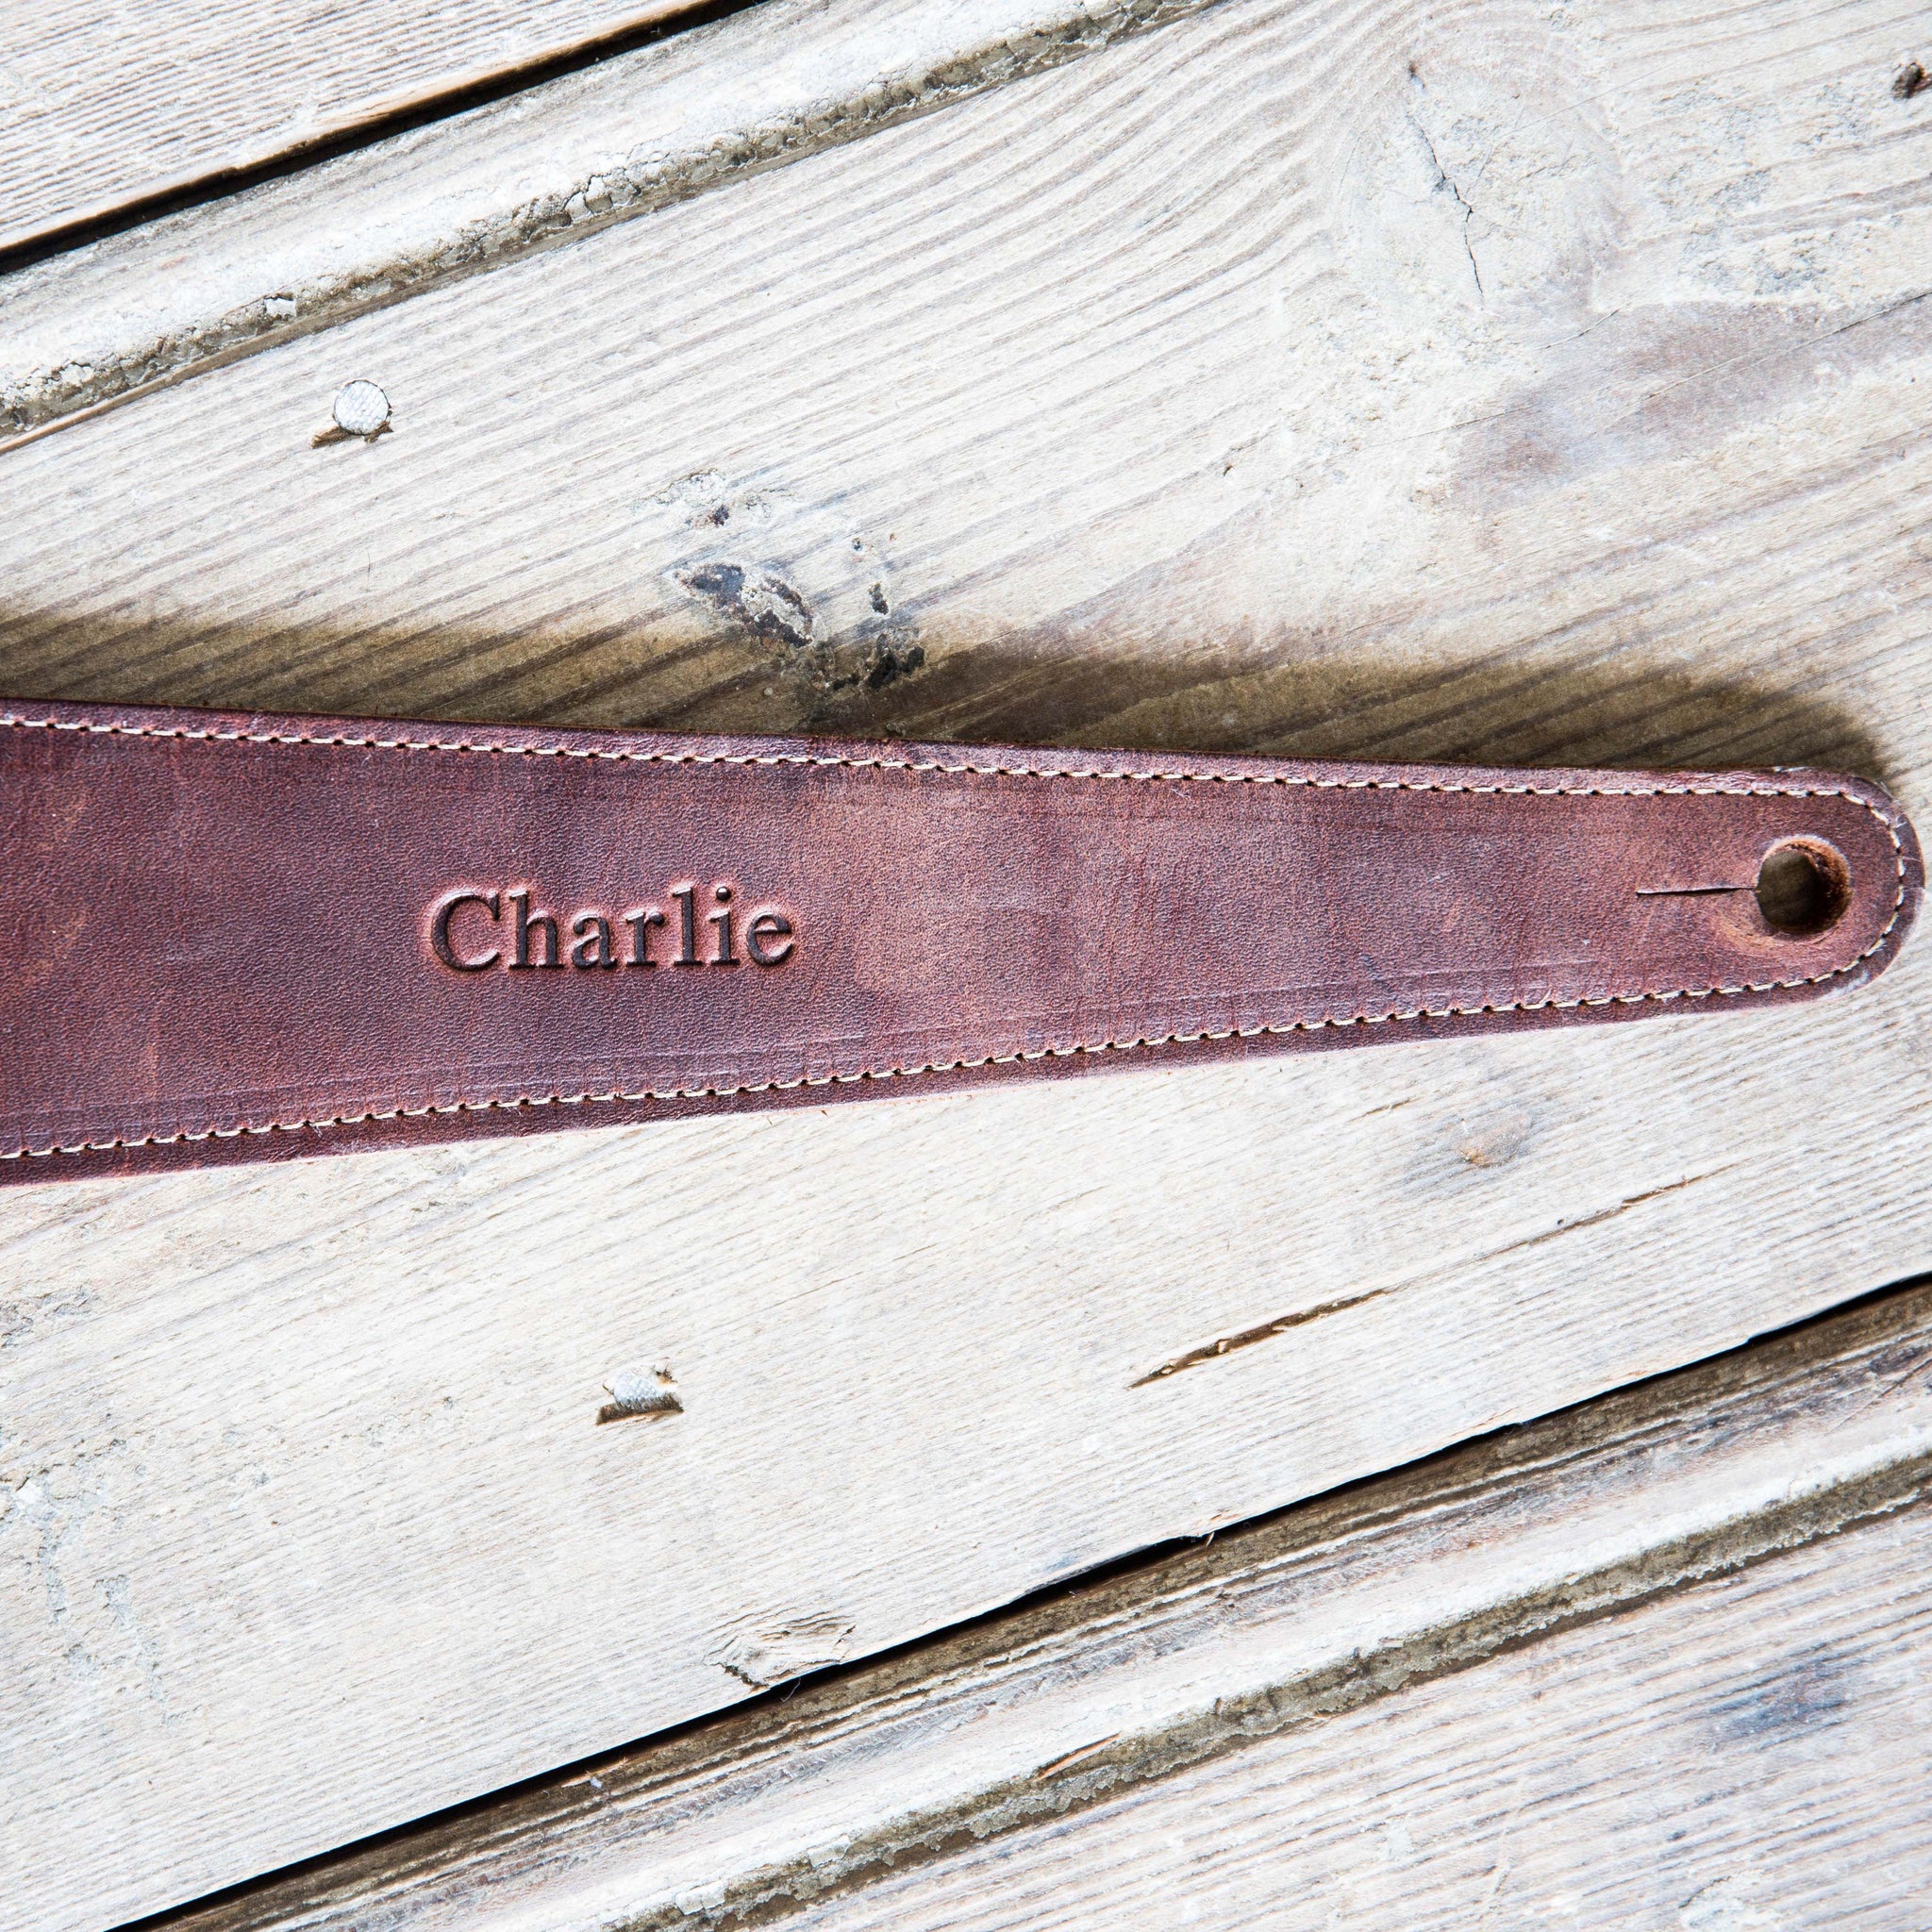 No. 101 Personalized Fine Leather Belt – Made in USA -, Chestnut / 34at Holtz Leather